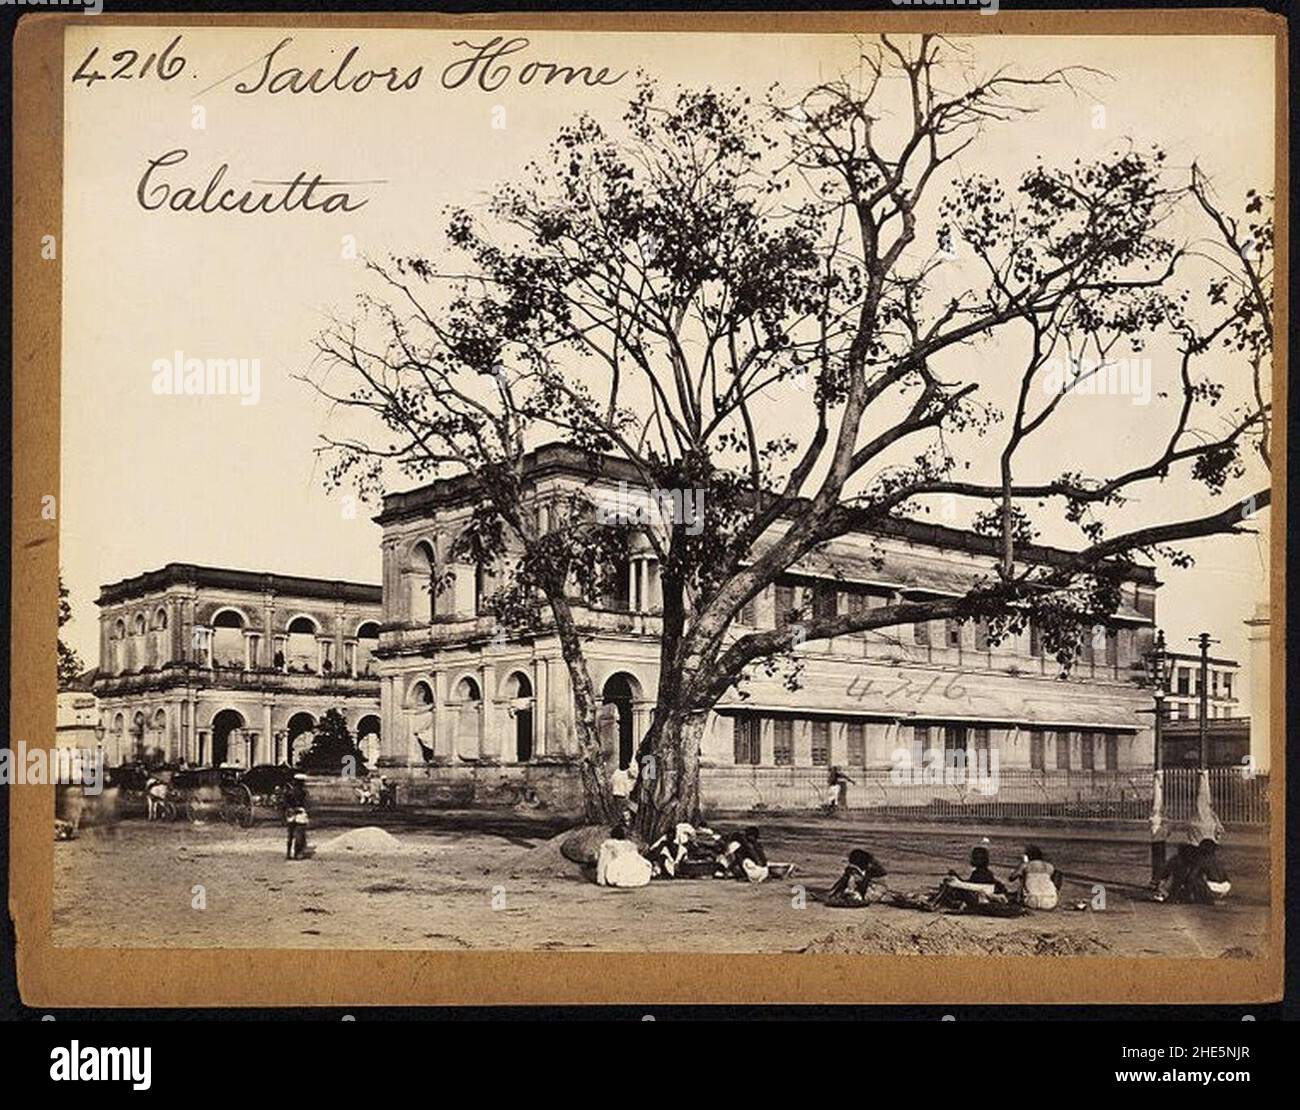 Sailors Home, Calcutta by Francis Frith. Stock Photo